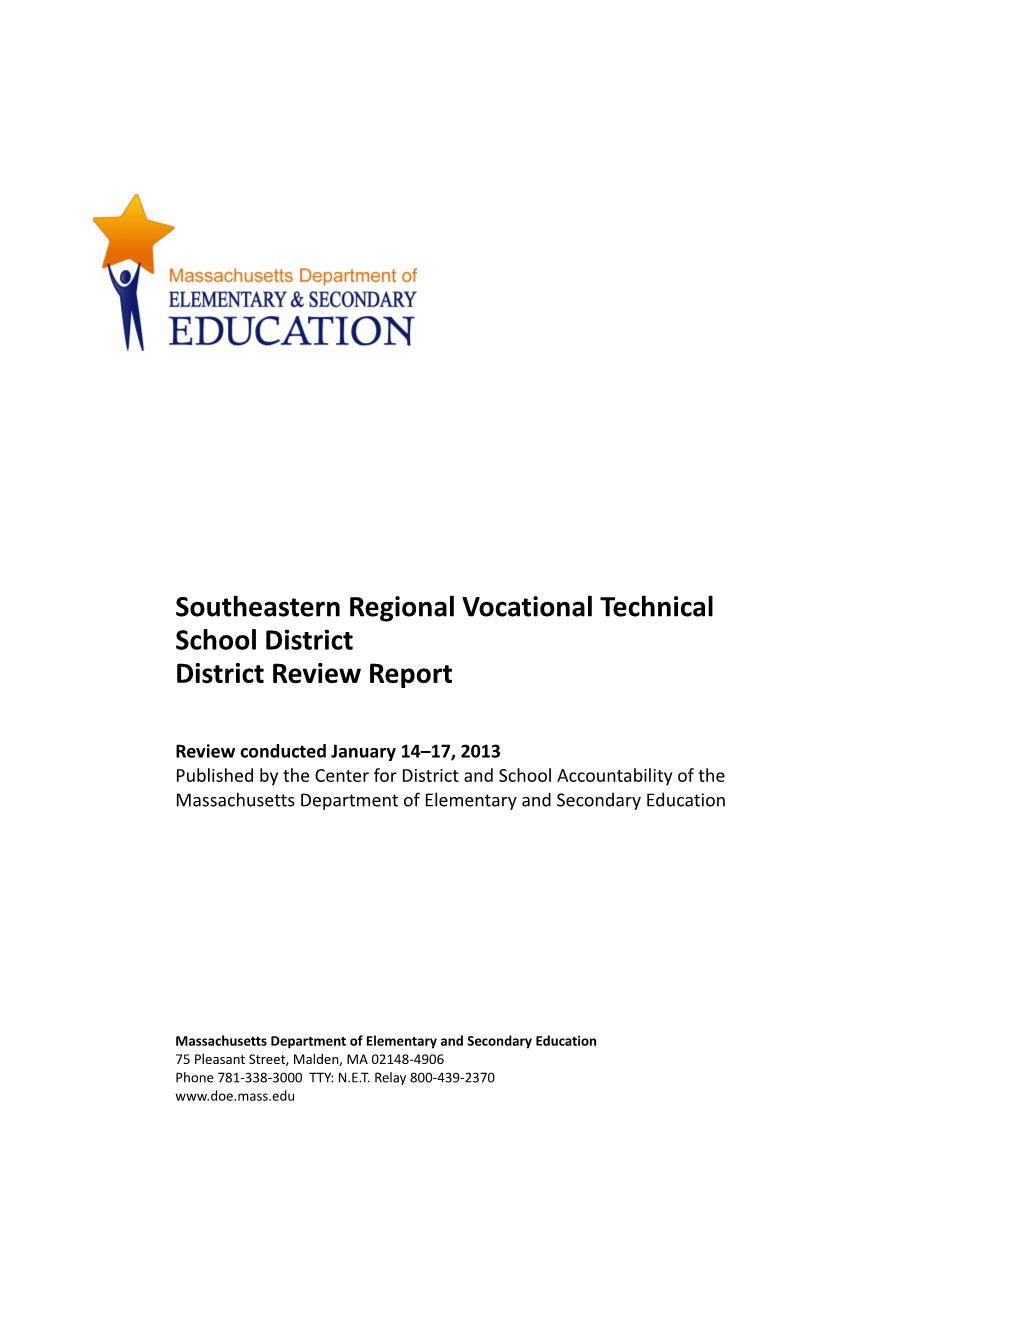 Southeastern RVTSD District Review Report, 2013 Onsite